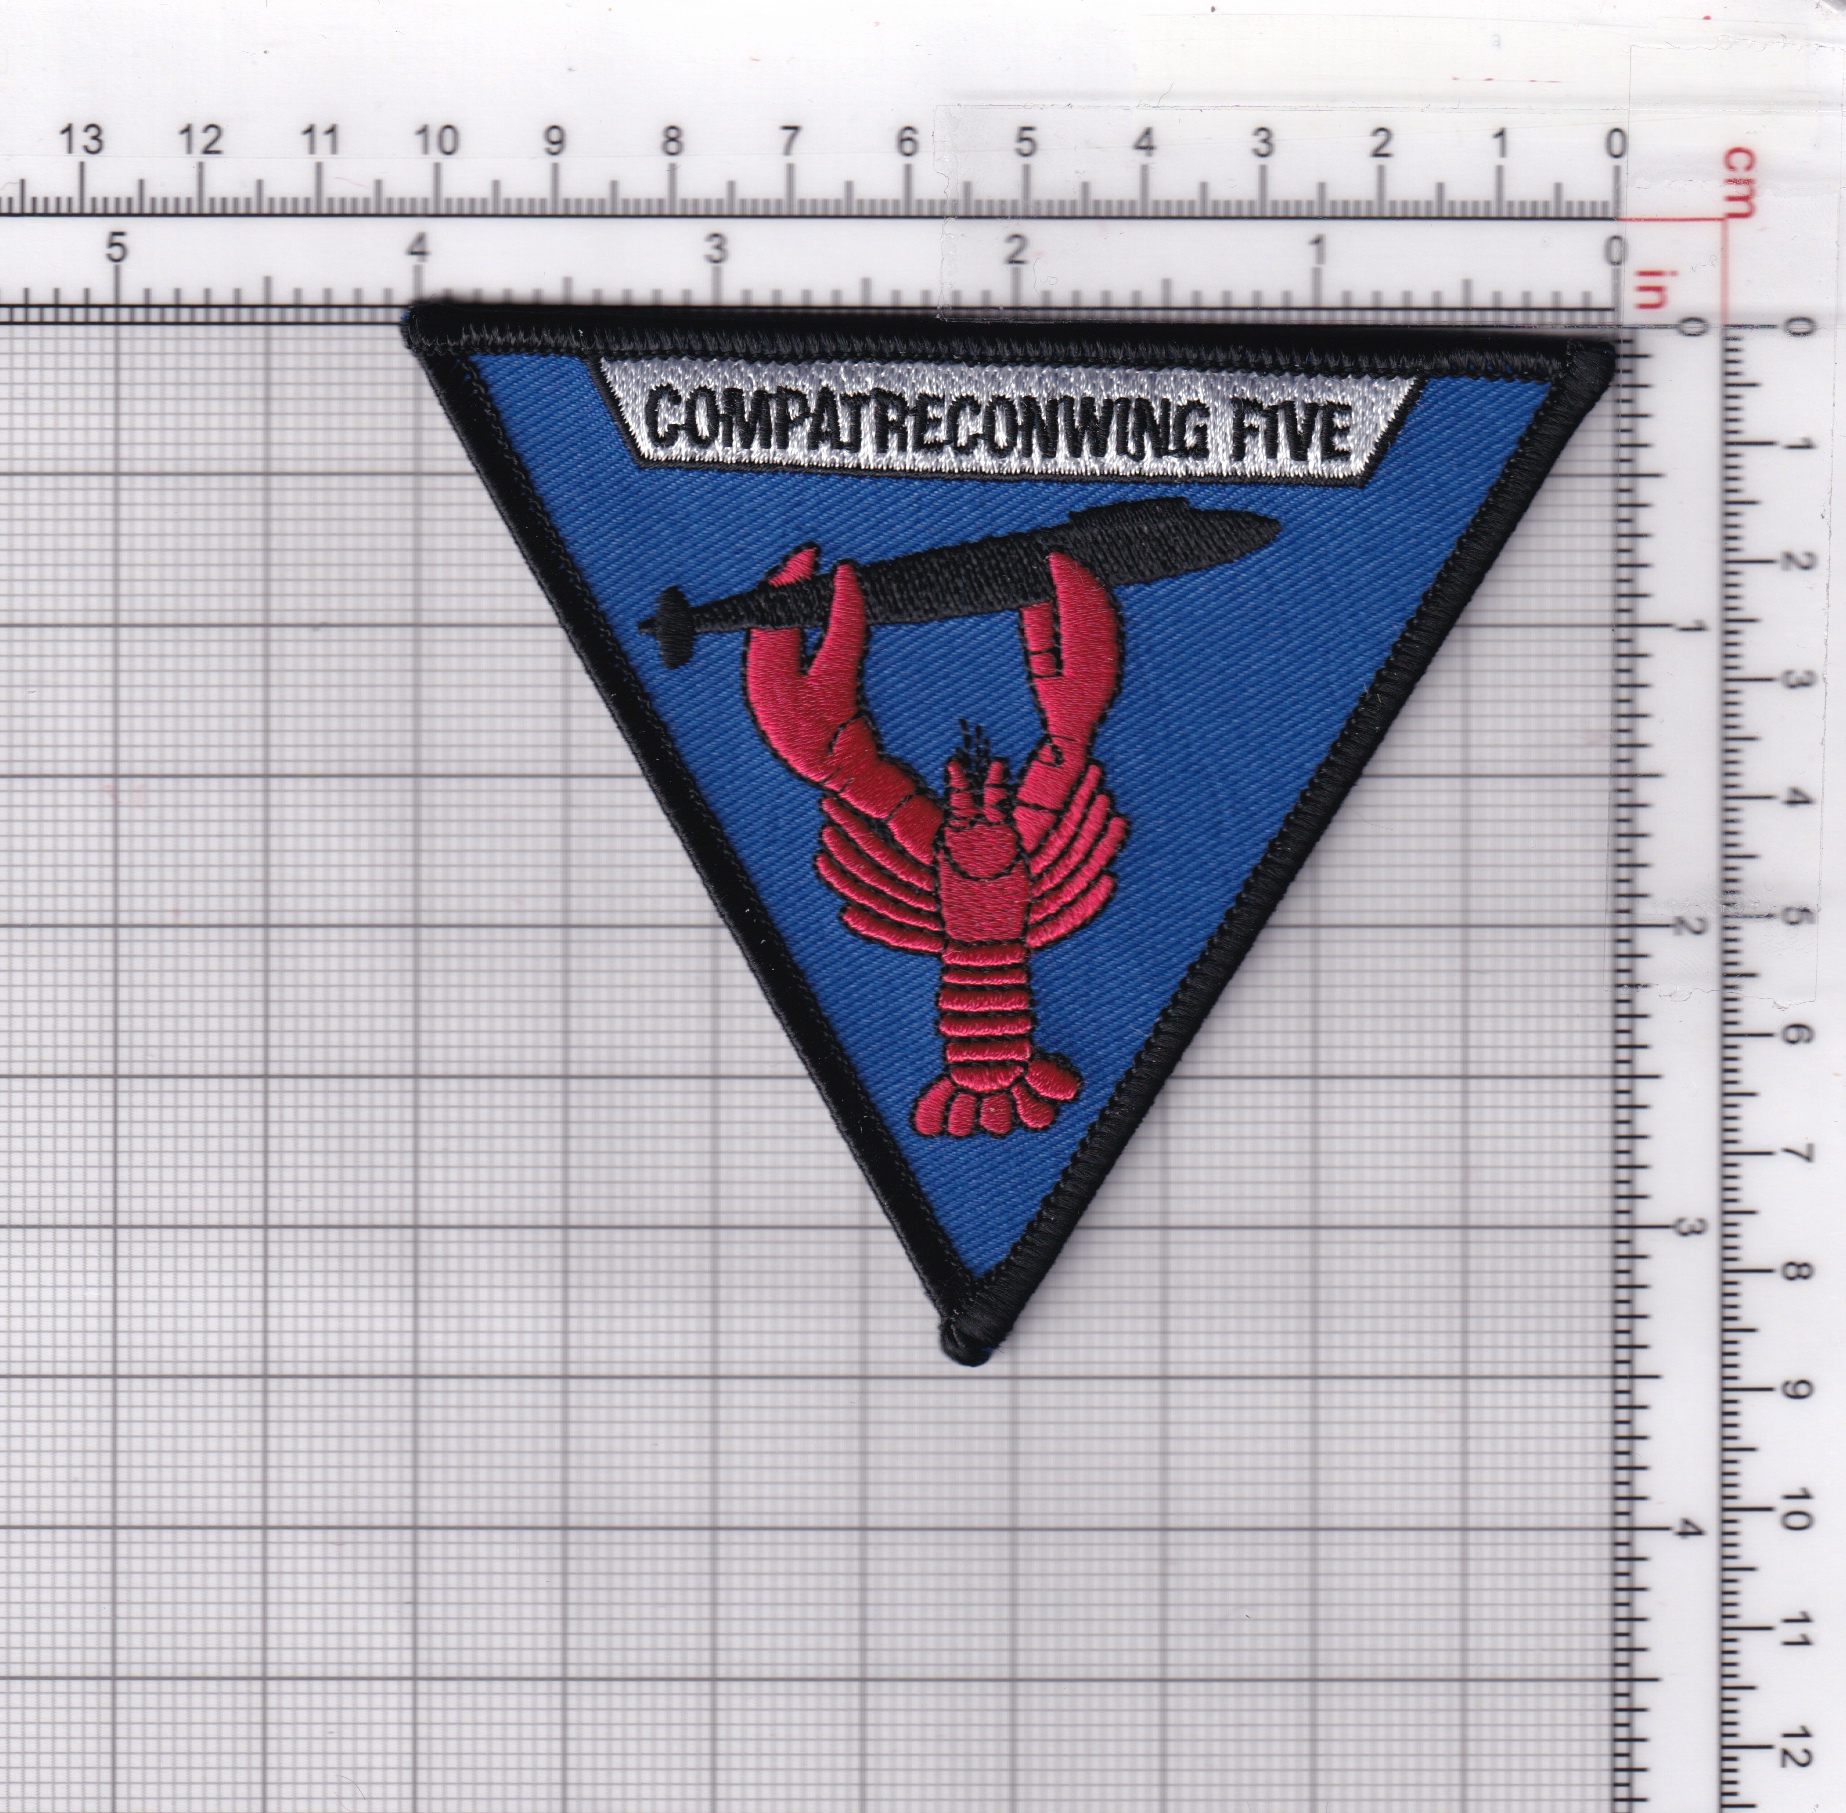 COMPATRECONWING Five Patch, 4 inch, Hook and Loop